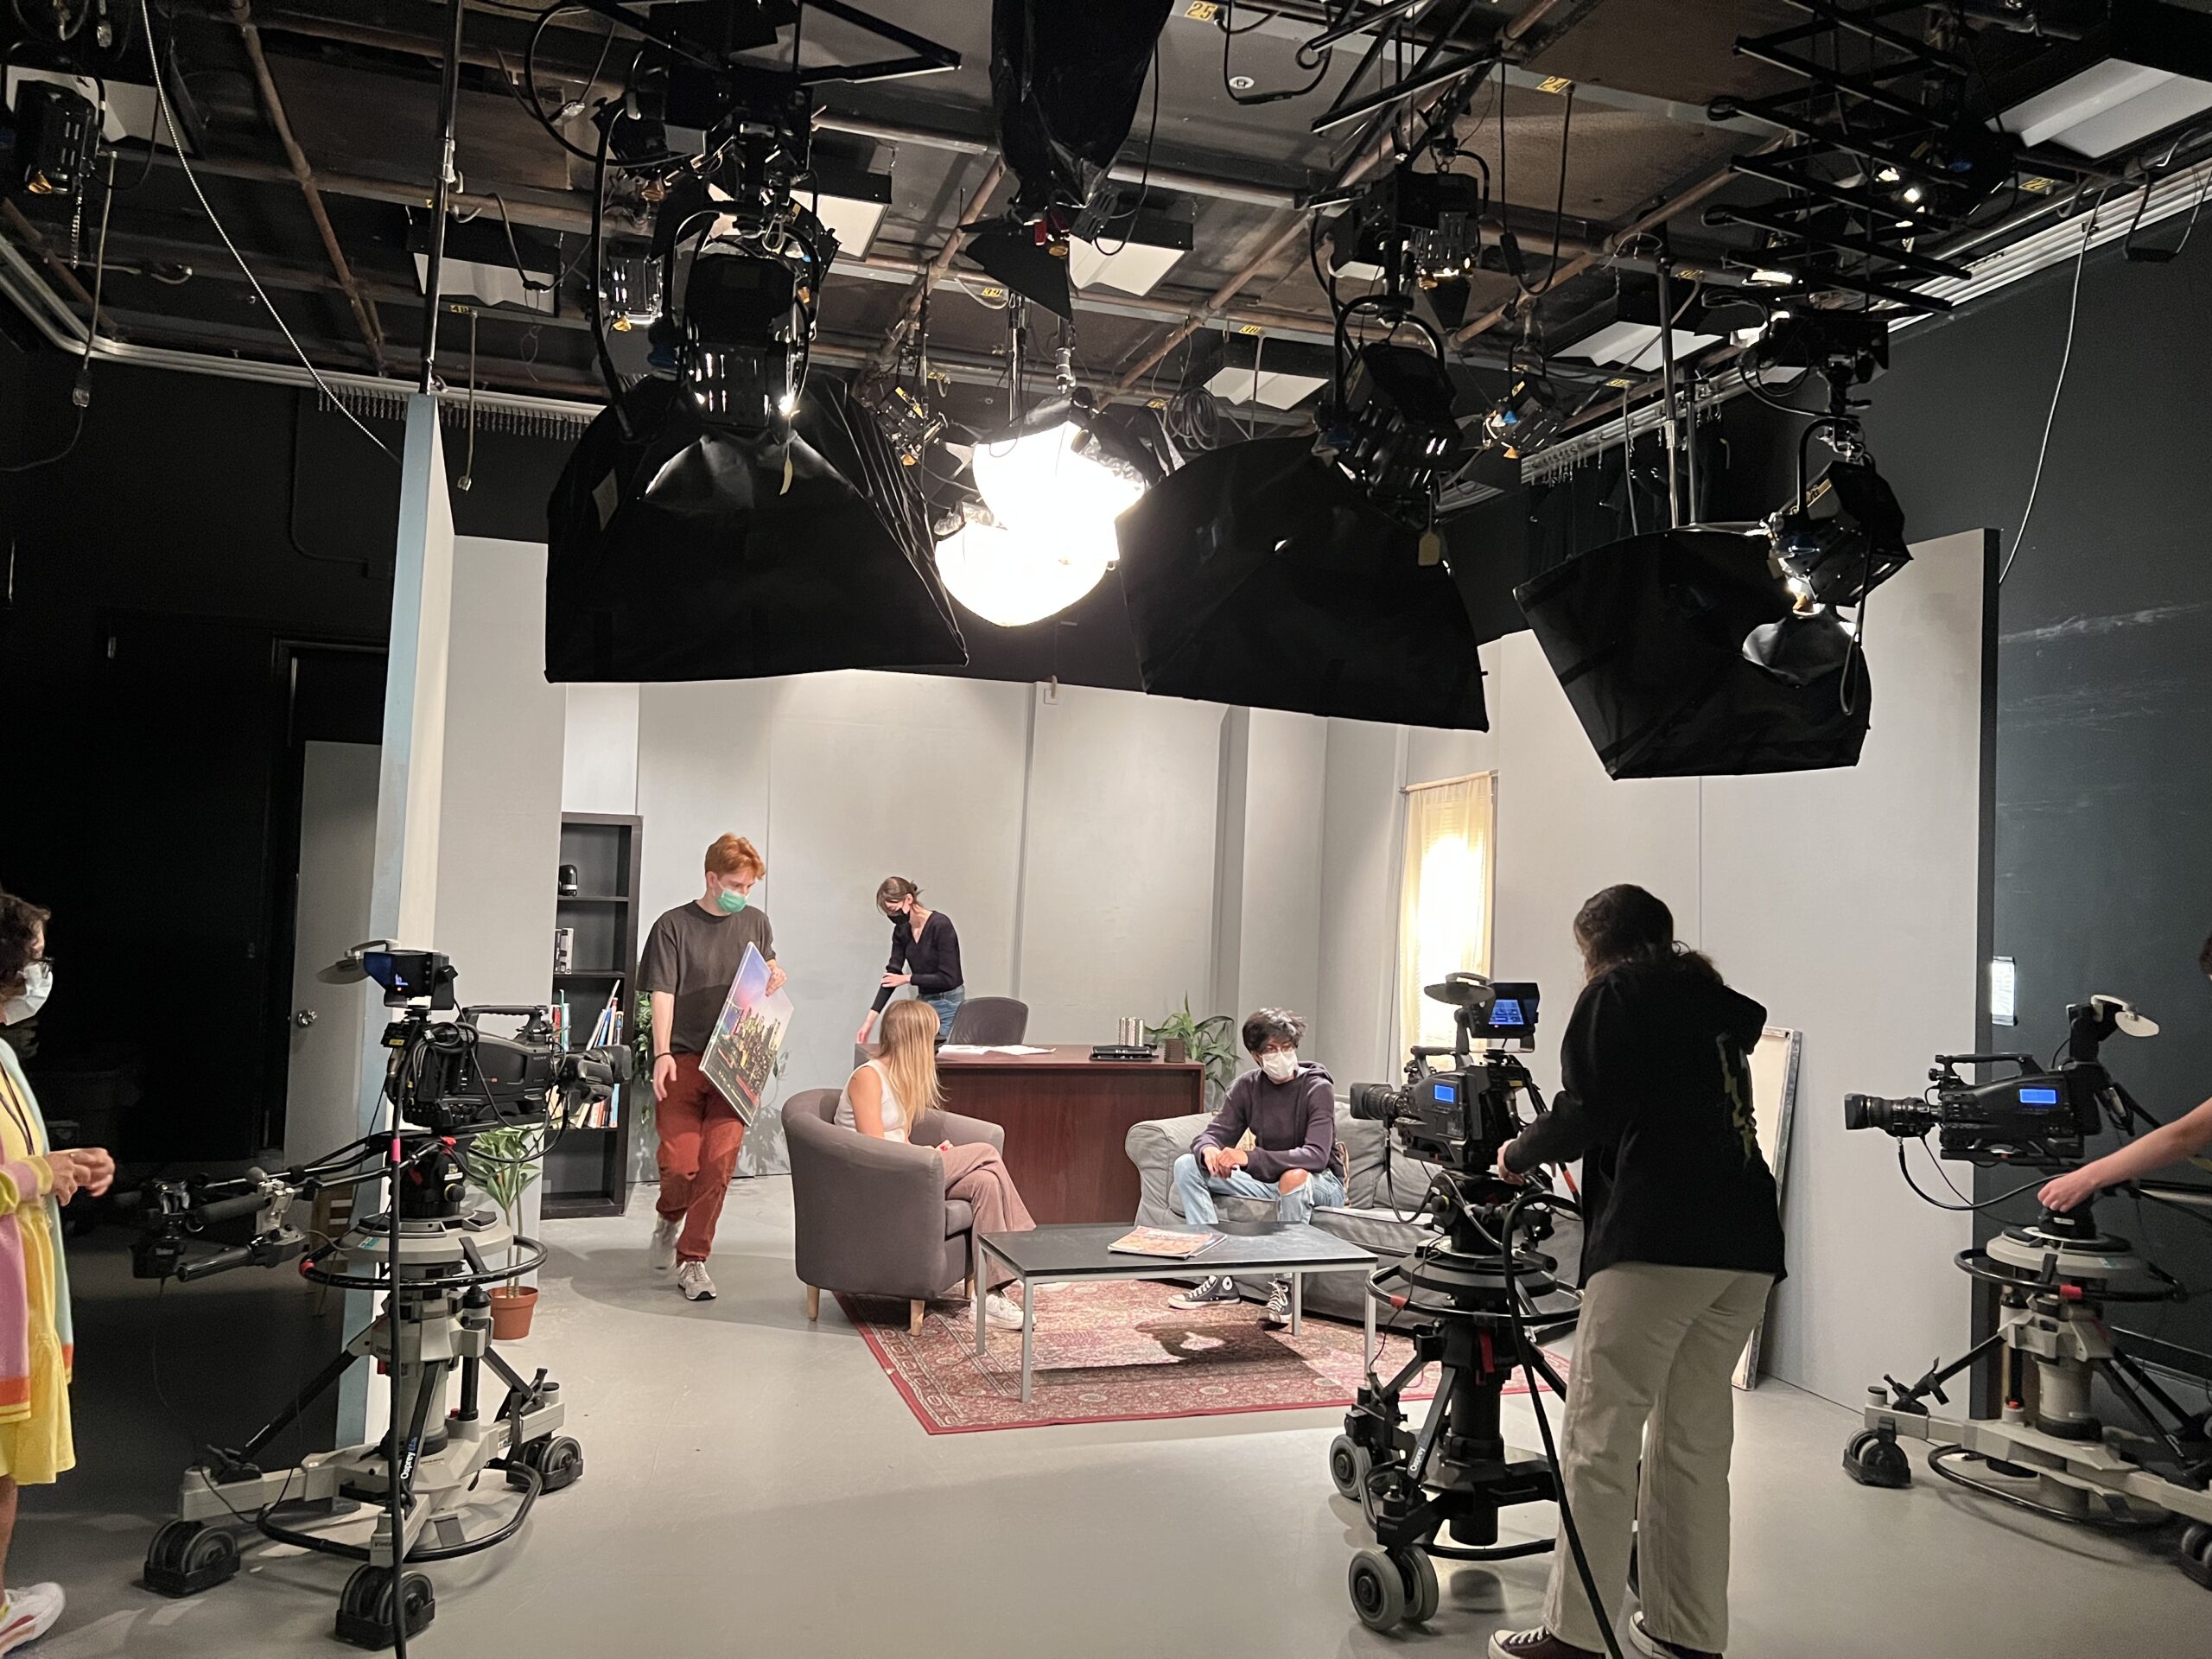 Behind the scenes of the Sight and Sound: Studio production course. Students film and act on a set.